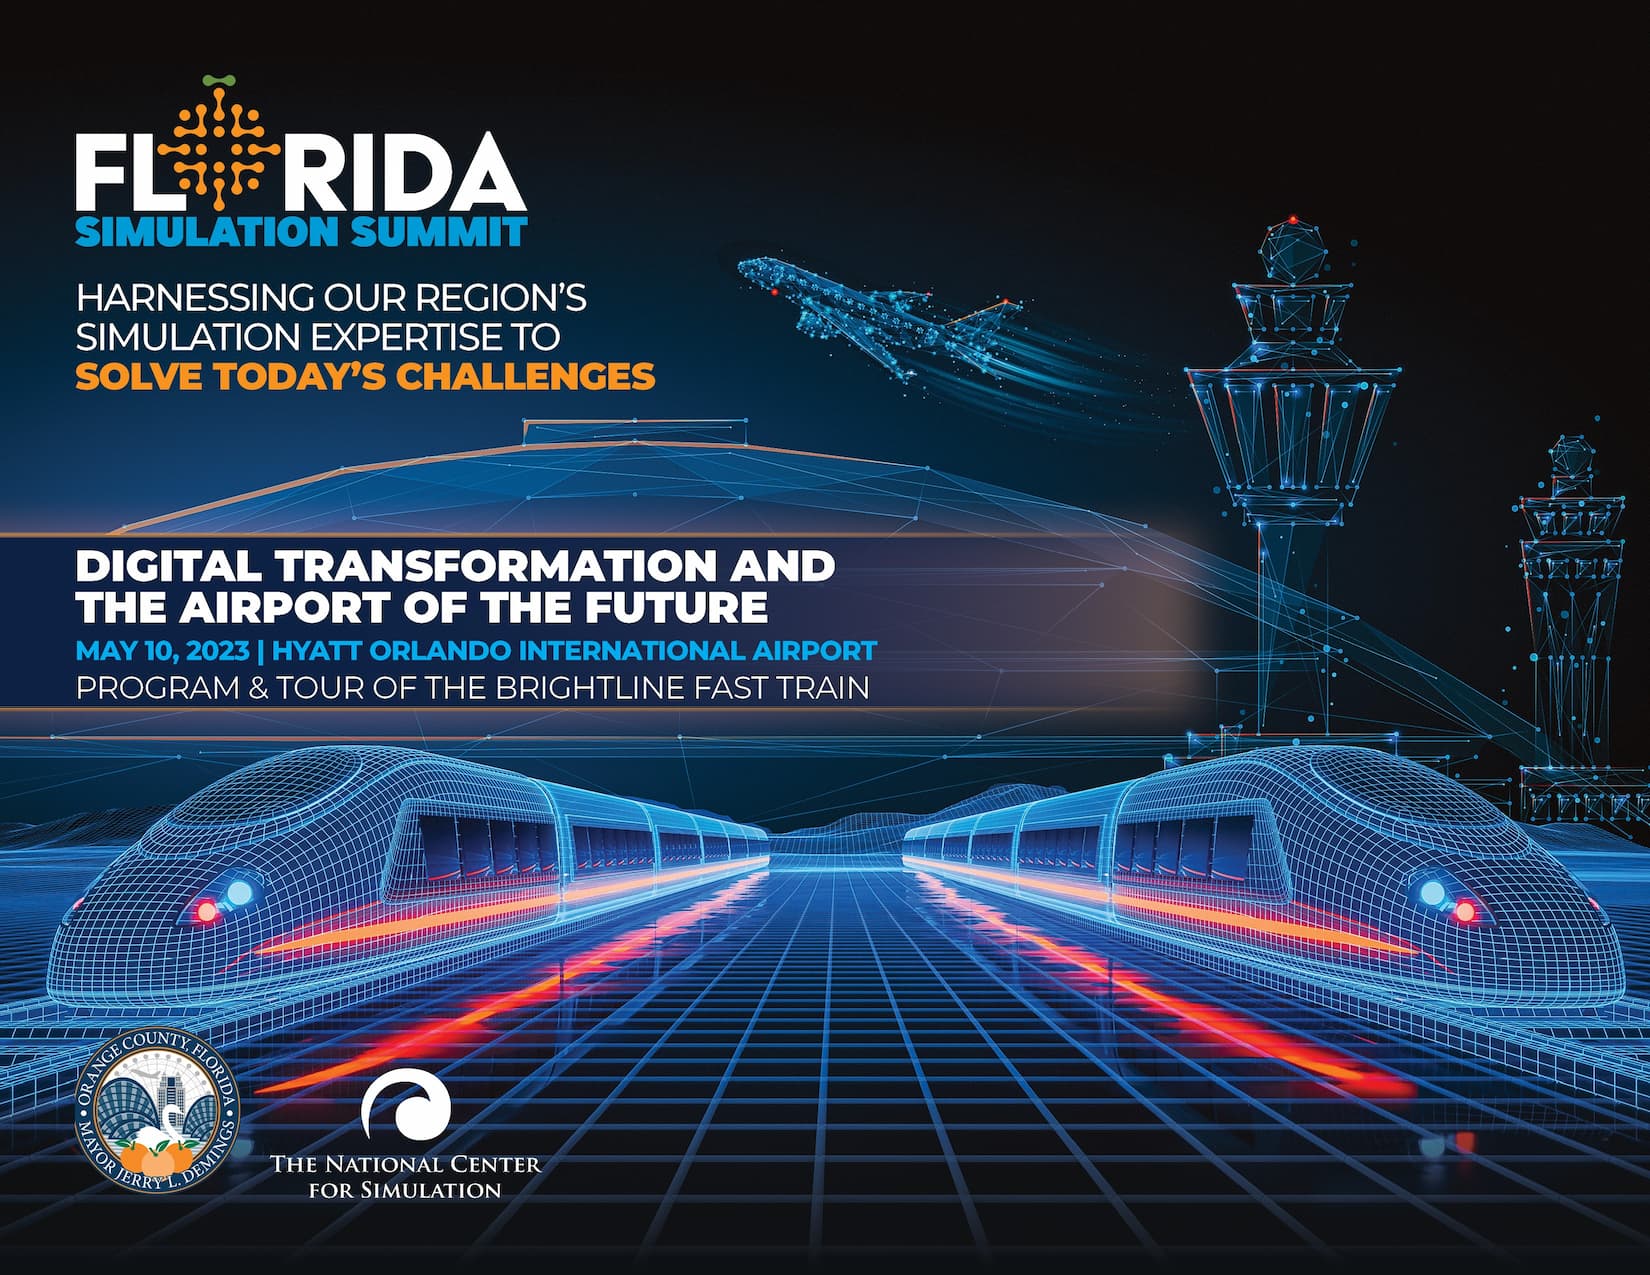 Florida Simulation Summit - Harnessing our region’s simulation expertise to solve today’s challenges - Digital transformation and the airport of the future - May 10, 2023 - Hyatt Orlando International Airport - Program and tour of the Brightline Fast Train